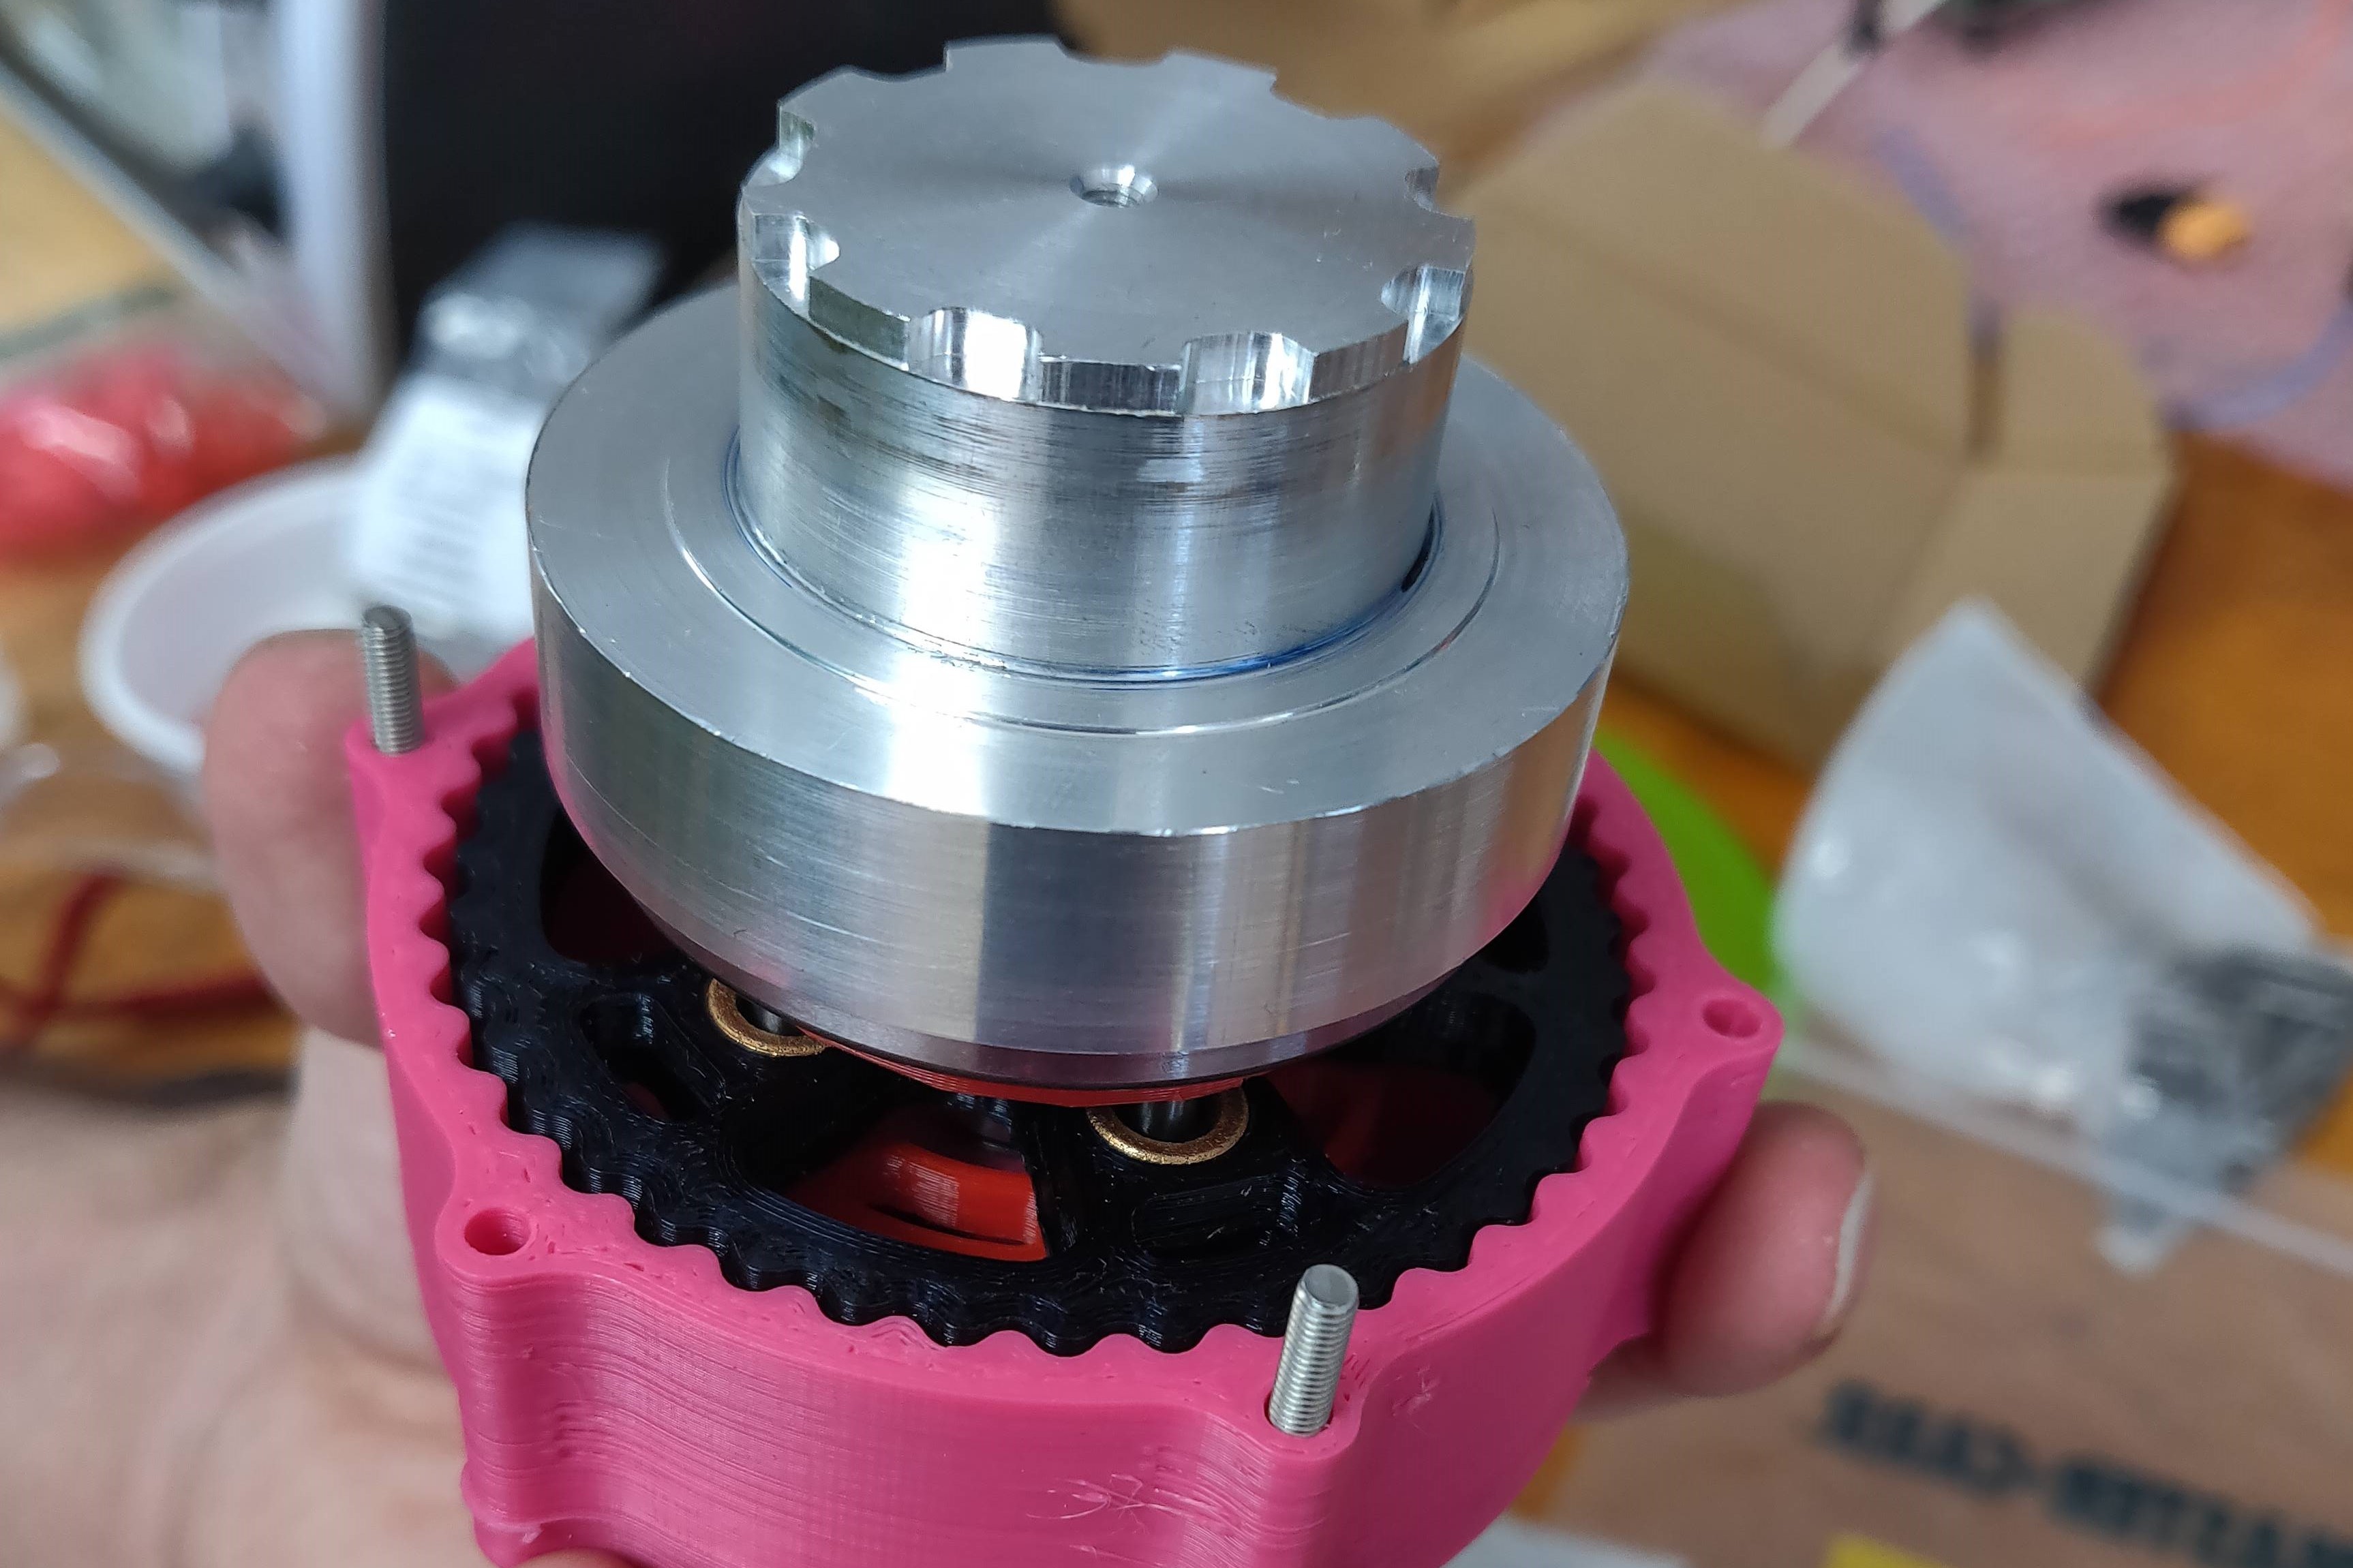 3D printed cycloidal gearbox without top cover